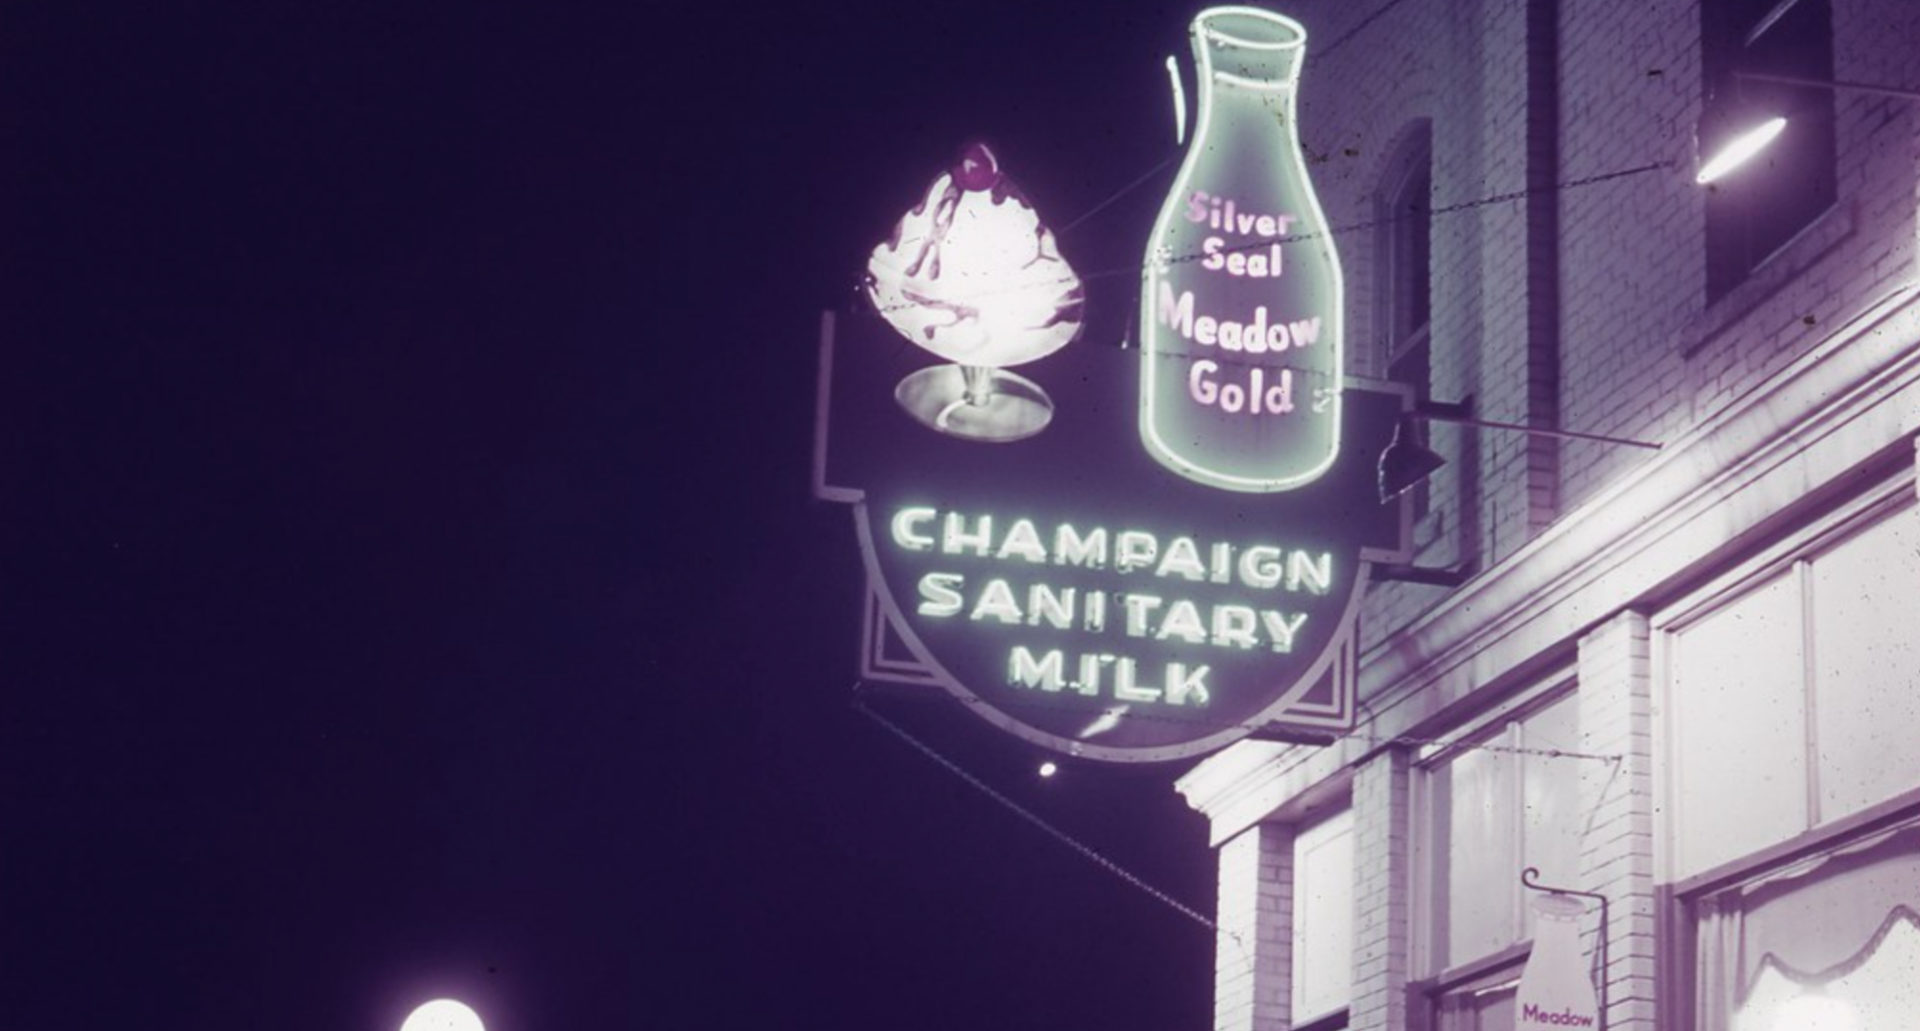 A neon sign in at 415 East University Avenue, Champaign in 1939 has an ice cream sundae, a decanter of milk, and below the words "champaign sanitary milk."